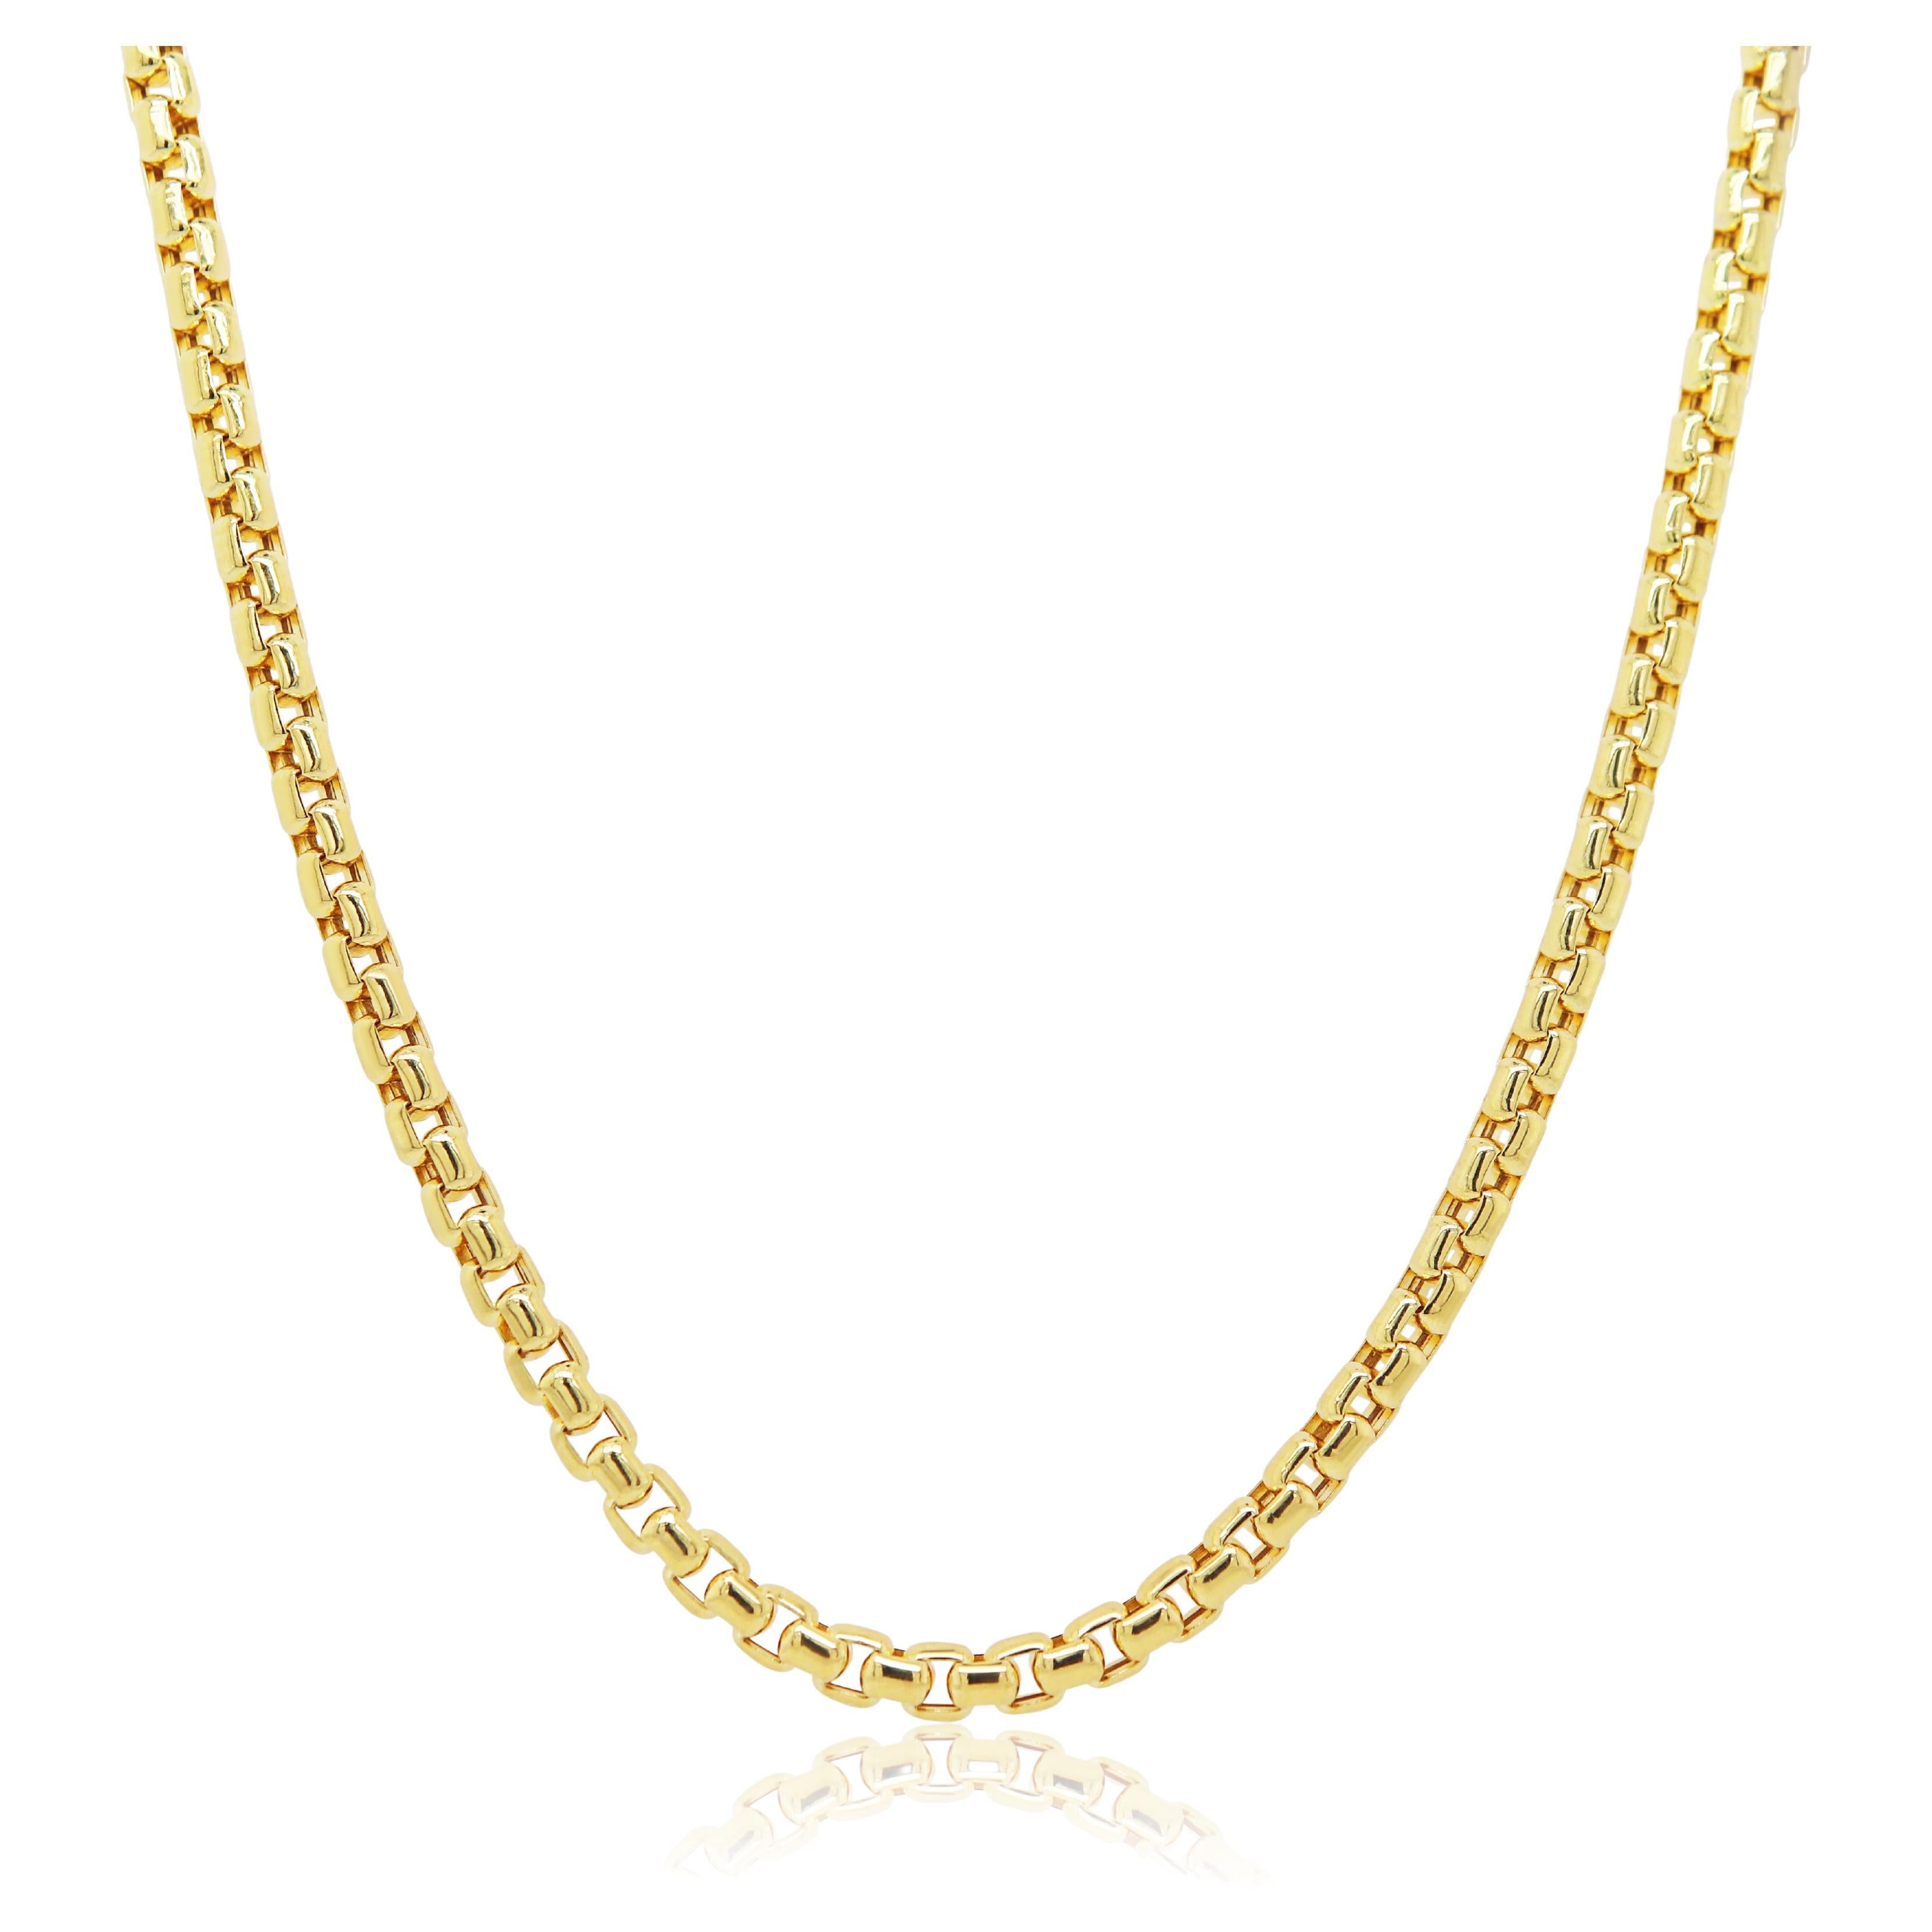 Box Link Chain Necklace 14K Yellow Gold